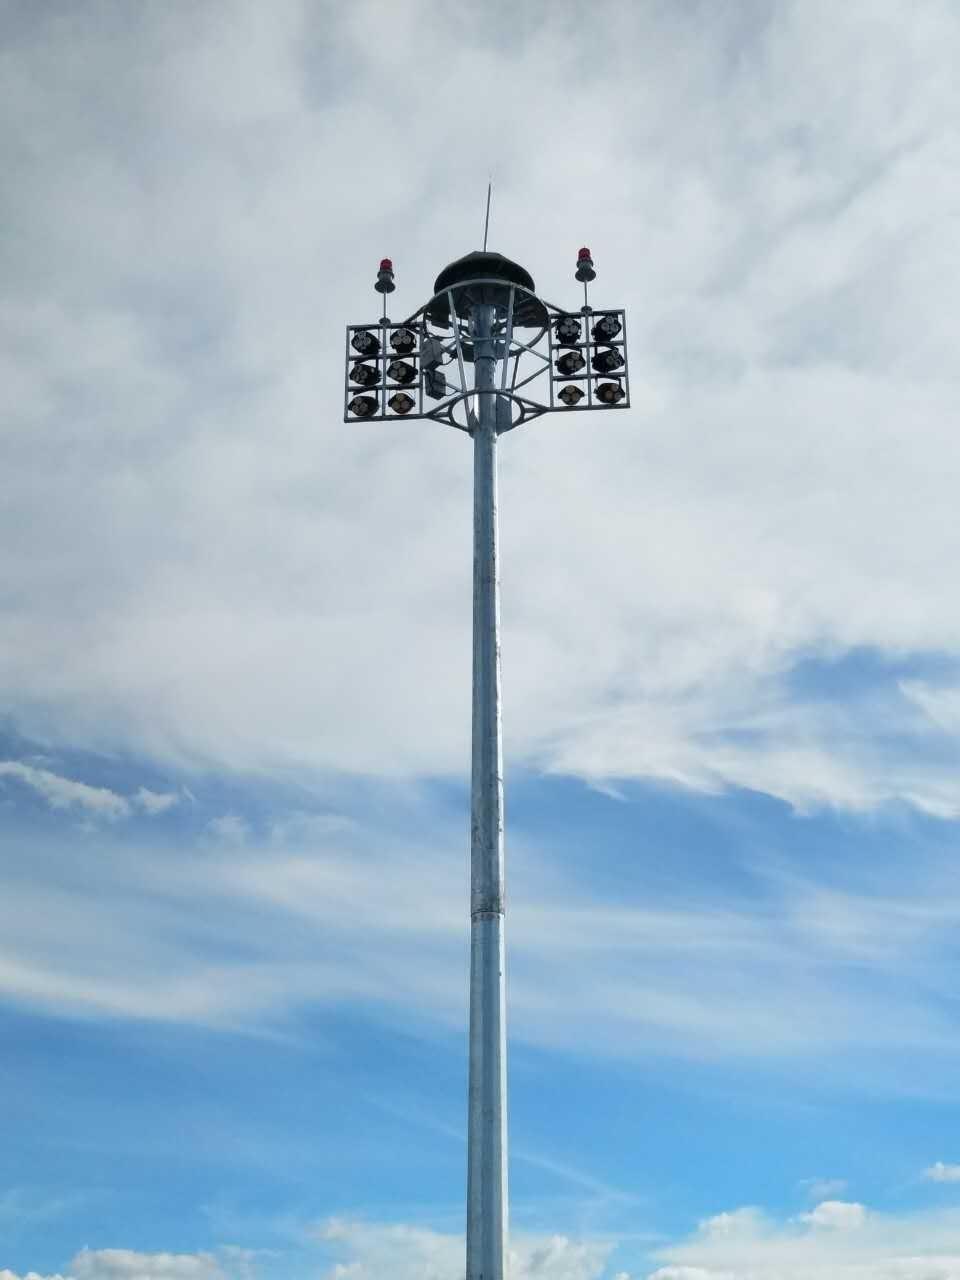 Low Prices Steel High Mast Lighting with System Motor Detachable Lighting Pole